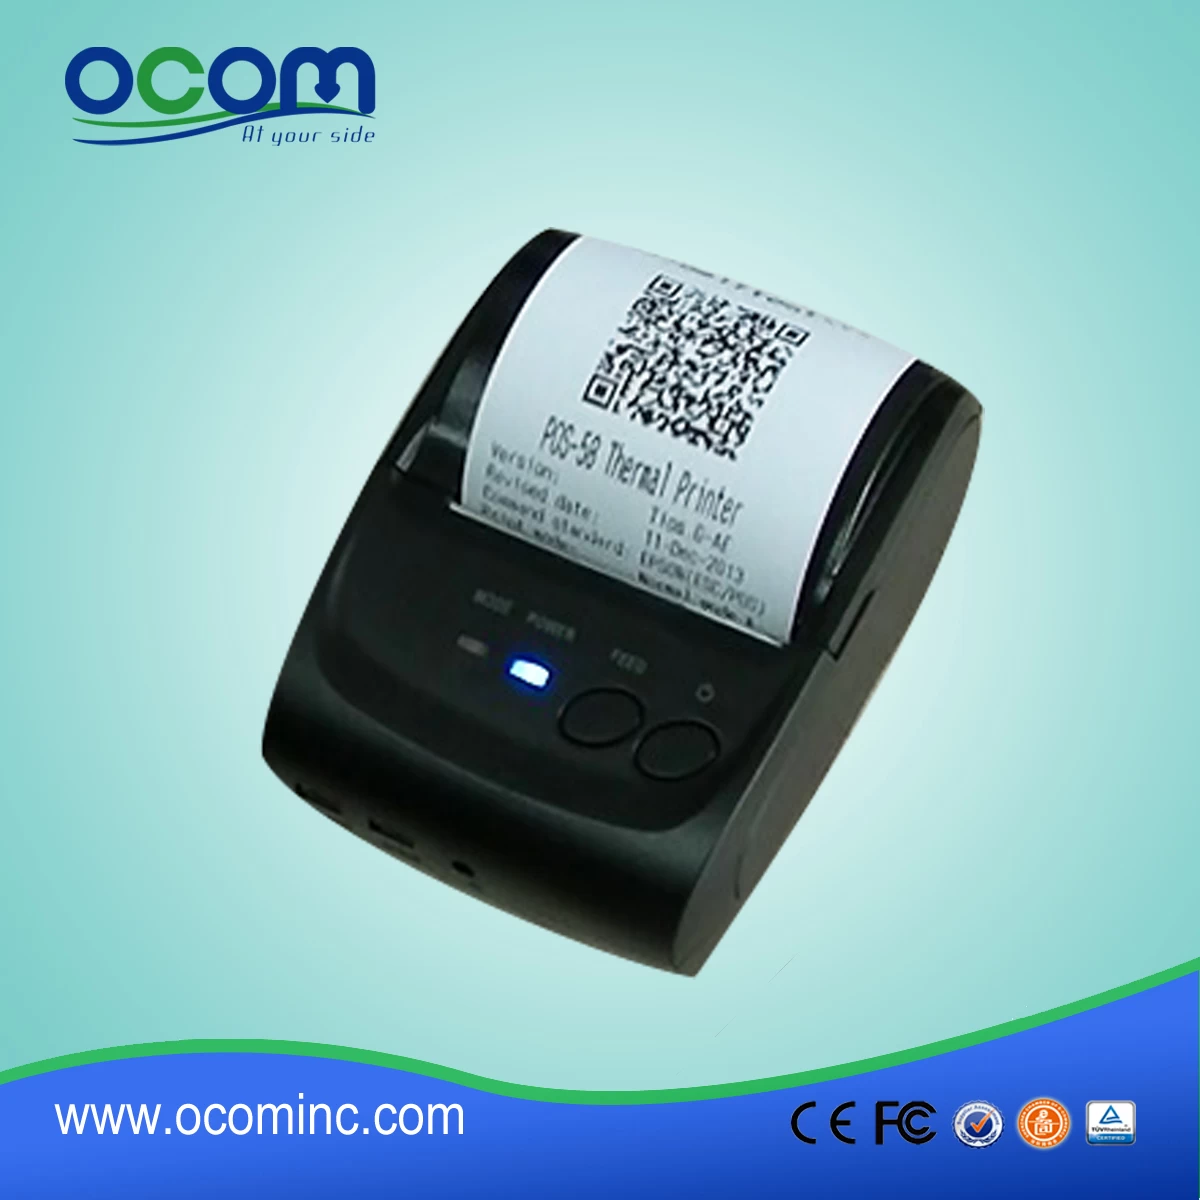 58mm Mini Bluetooth Thermal Printer for Android or iOS